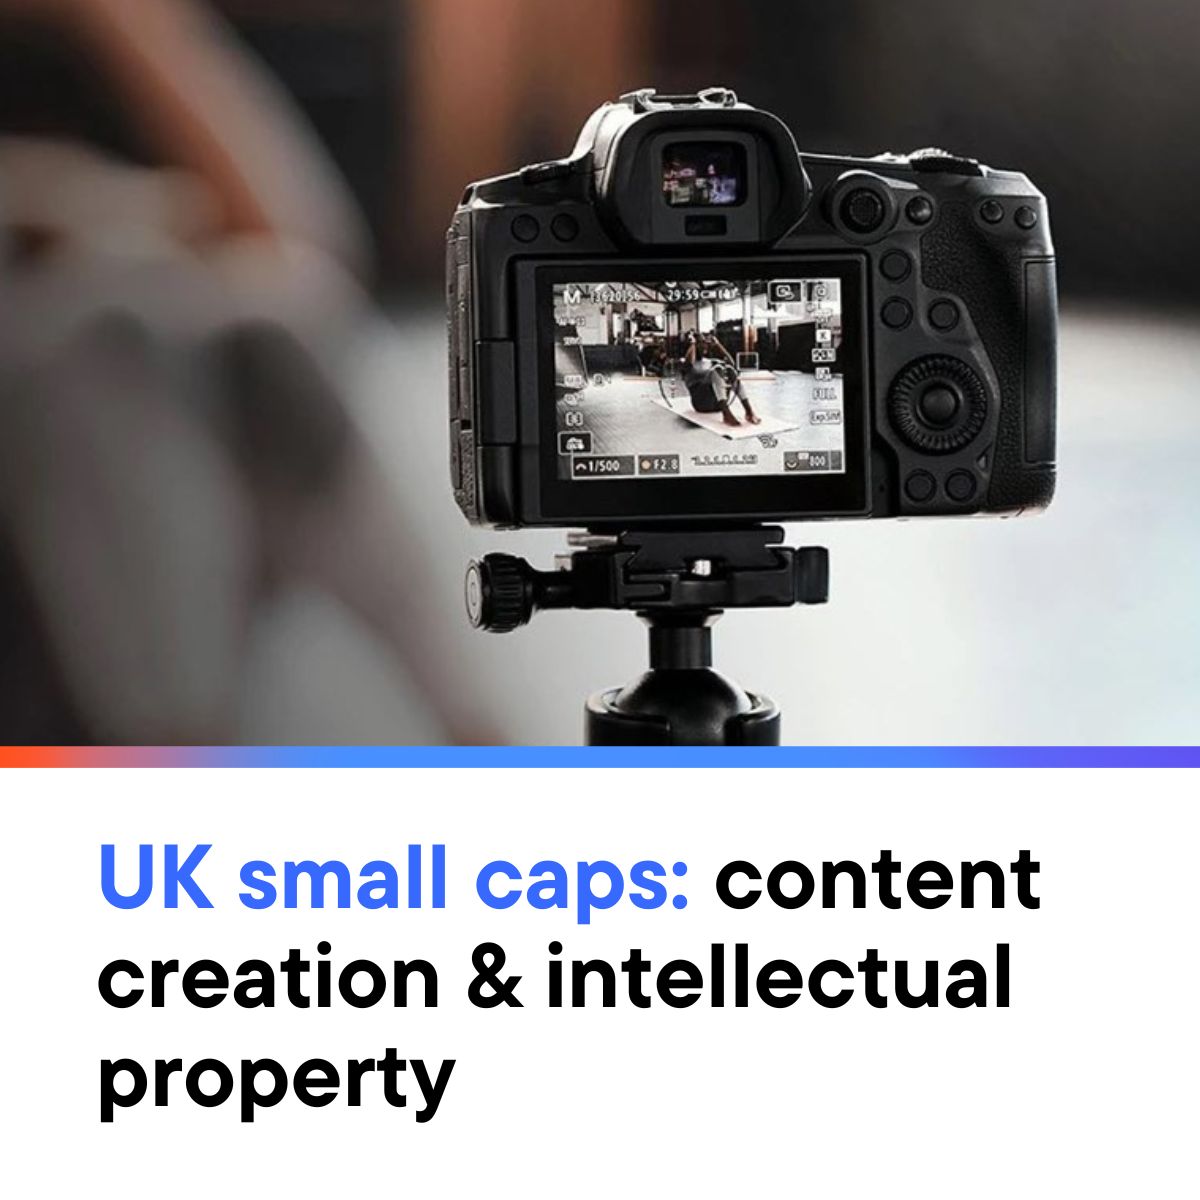 UK small caps: content & intellectual property How are shifting trends in content consumption boosting businesses that create innovative content? s.frk.com/3Ja8GA0